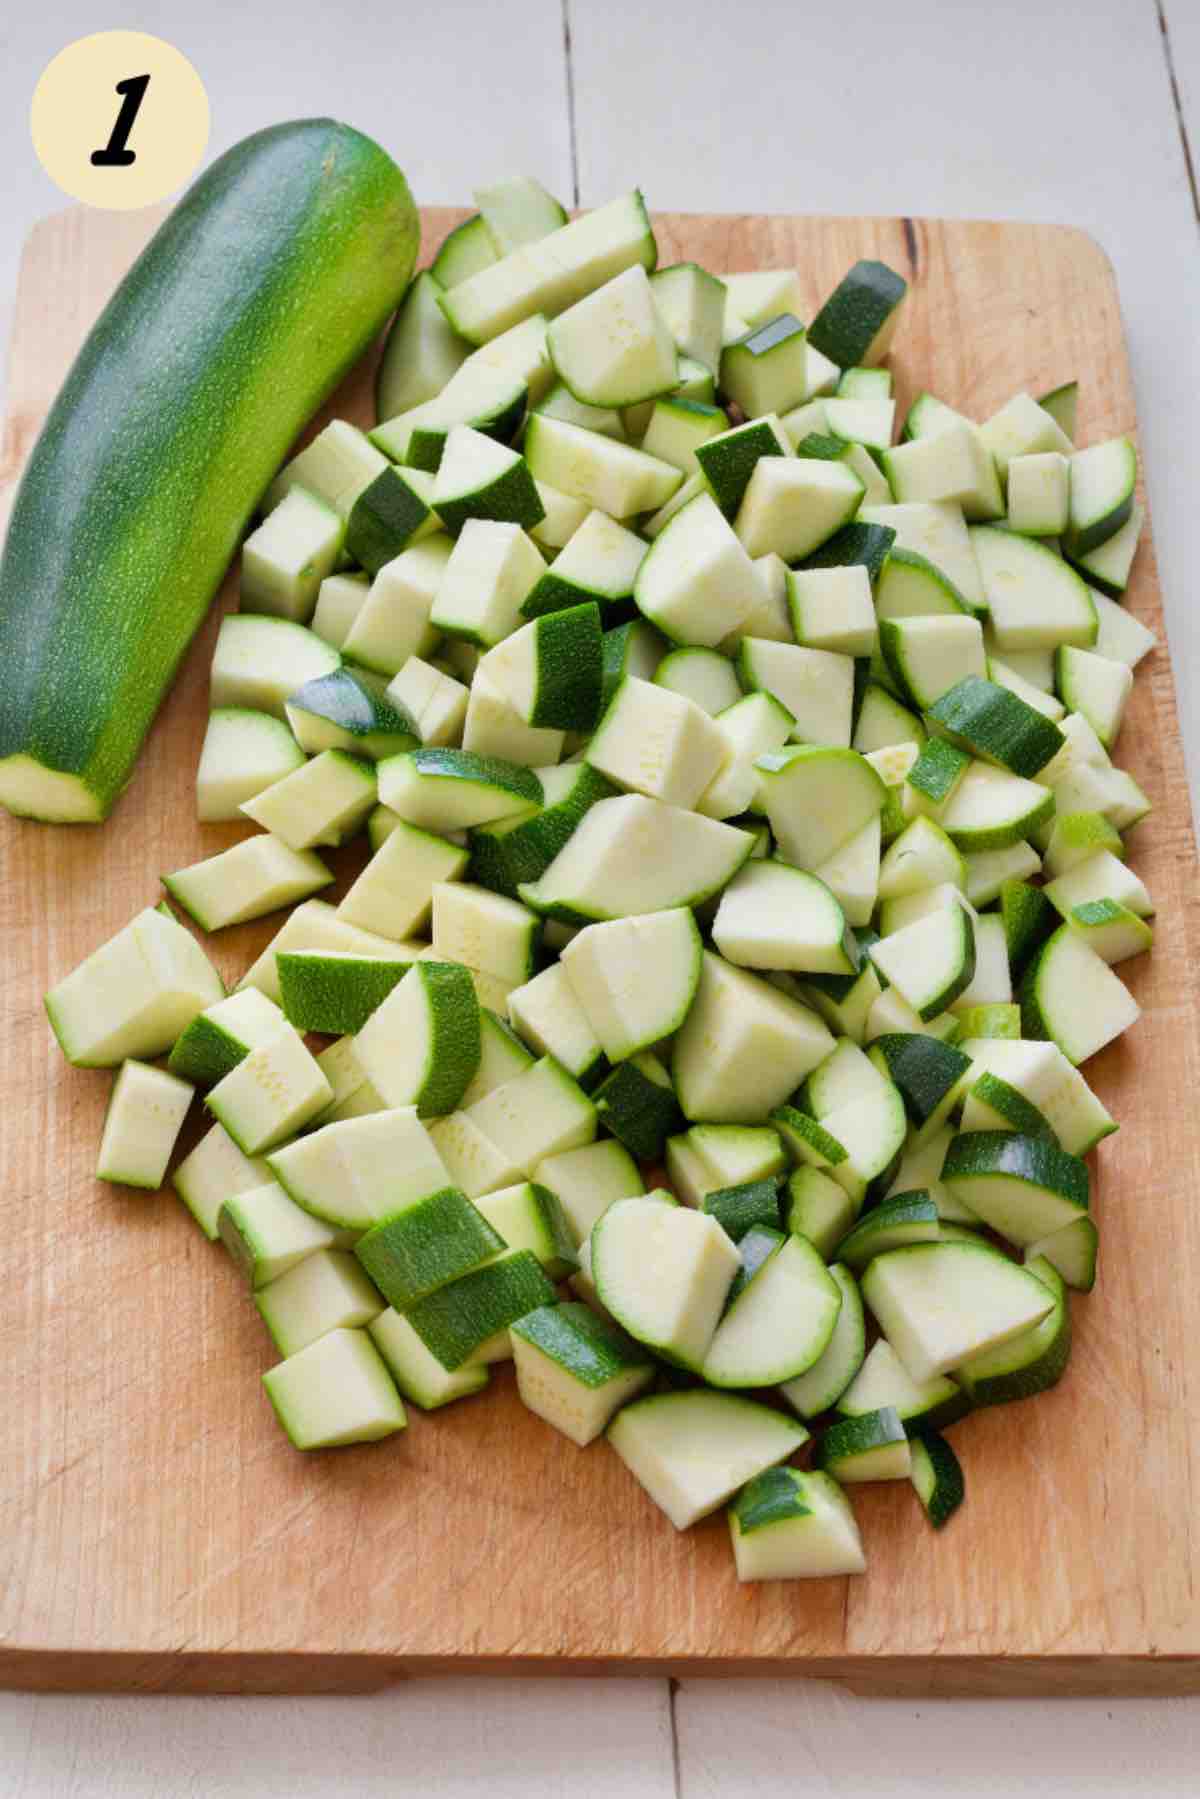 Chunks of courgettes on a wooden board.